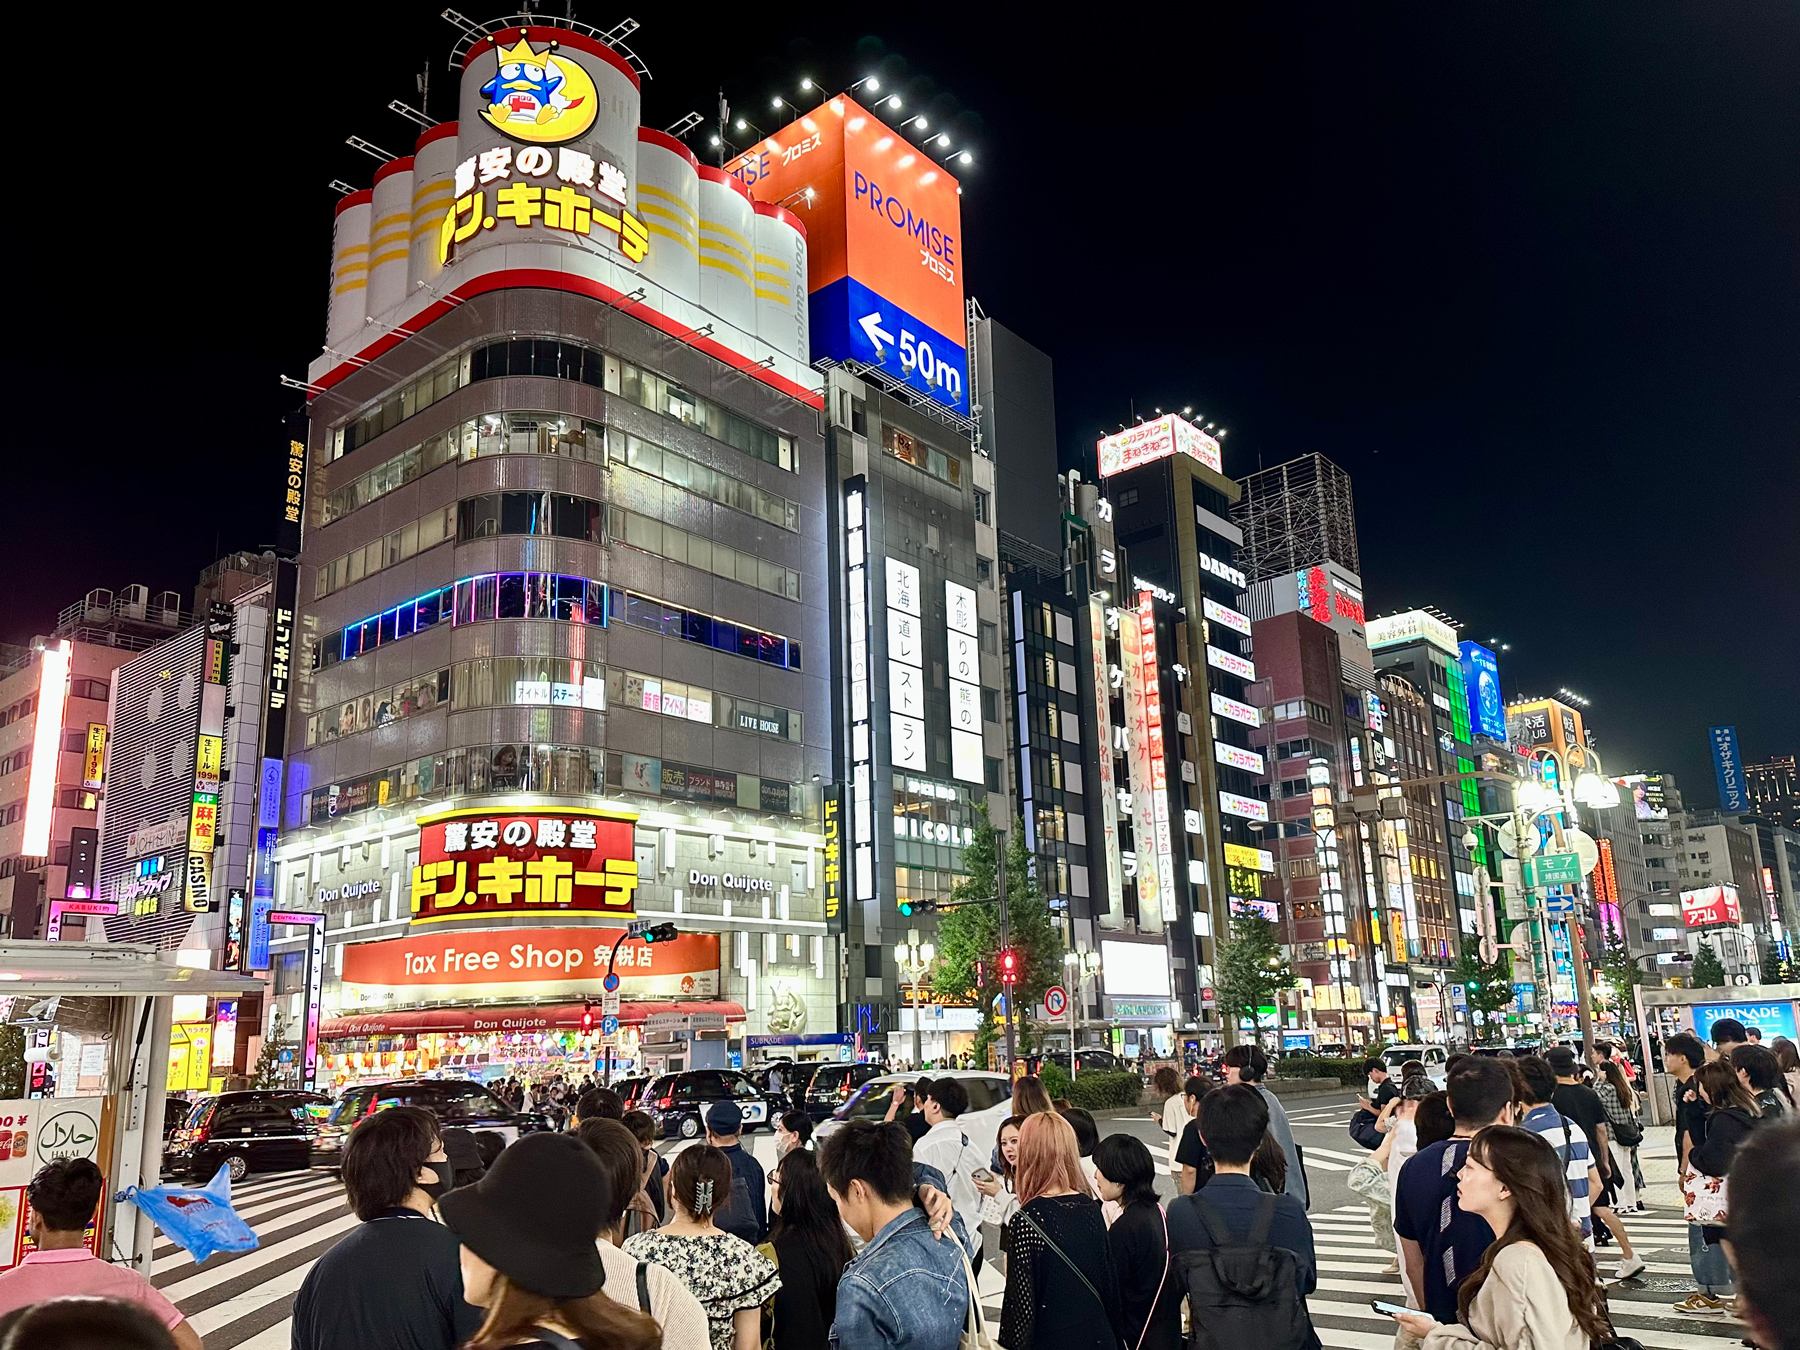 A view across a busy street crossing in Kabukicho, to tall buildings covered in lit-up signs